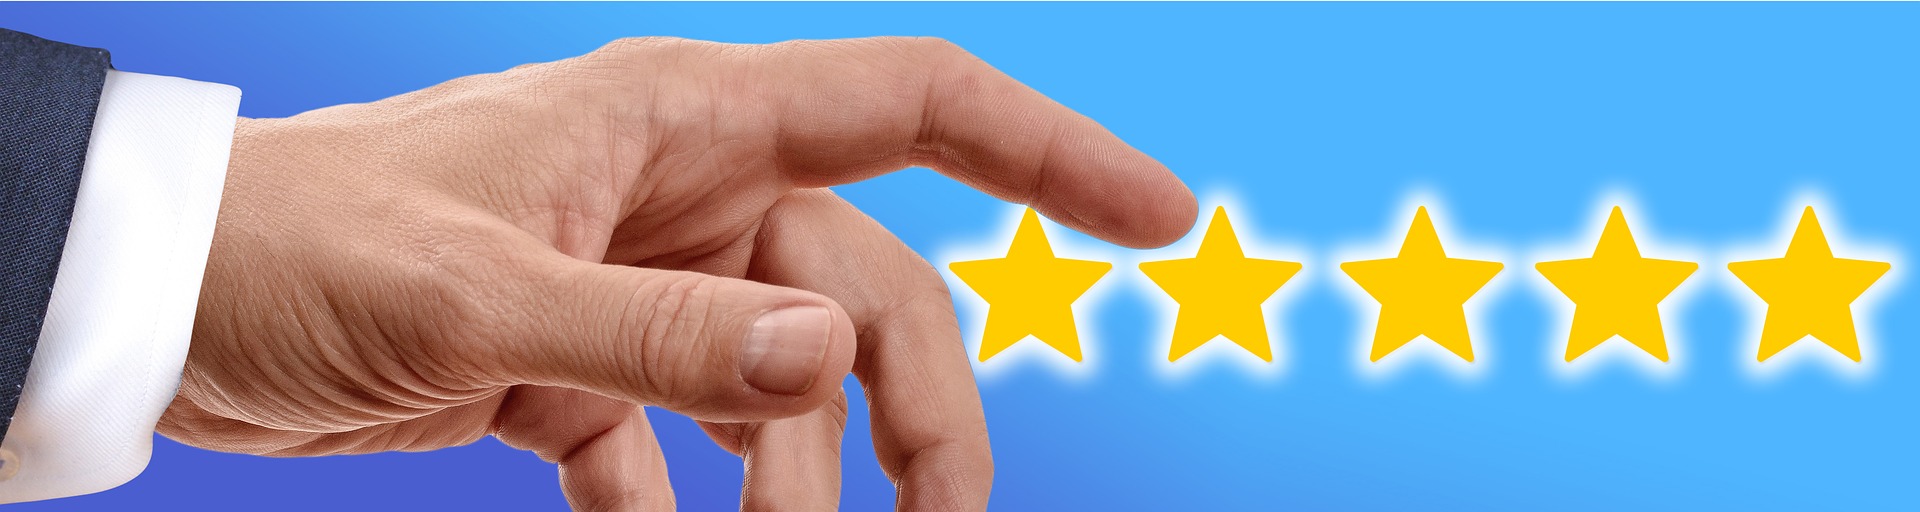 How to make use of positive reviews for promoting your restaurant